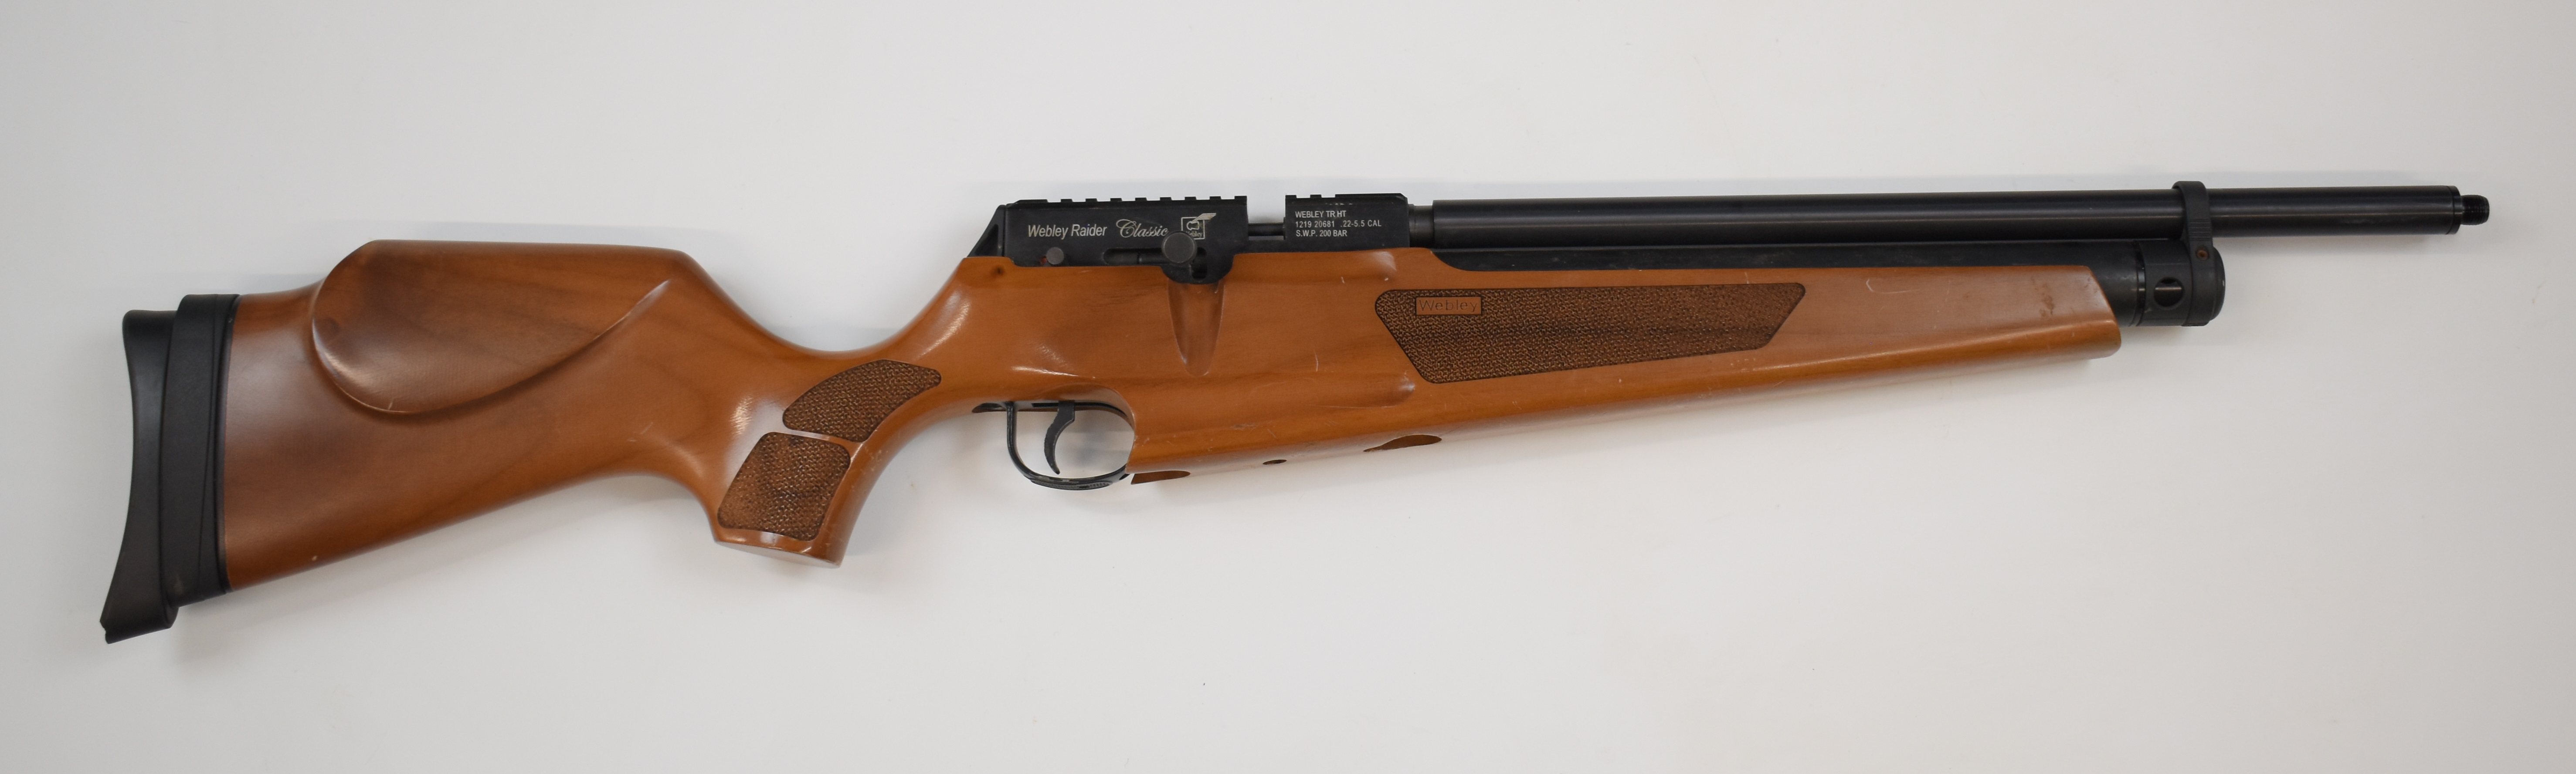 Webley Raider Classic .22 PCP air rifle with textured semi-pistol grip and forend, raised cheek - Image 2 of 10